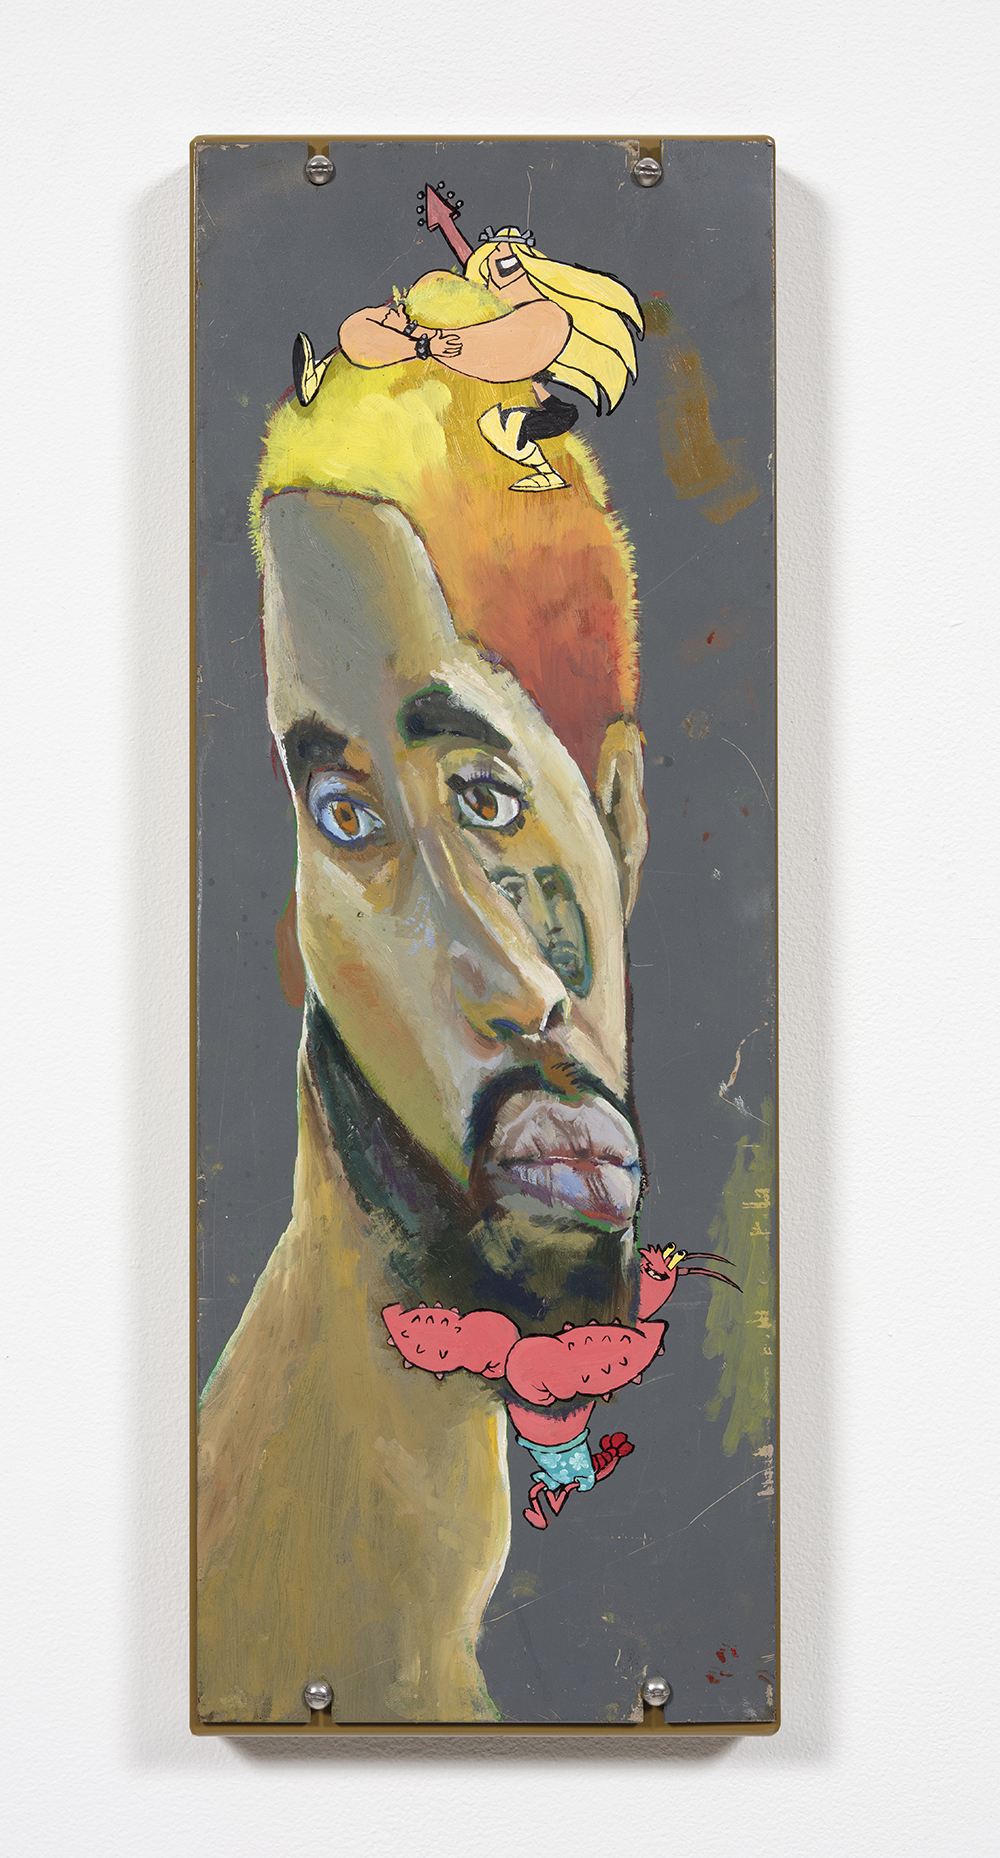 Yung Jake. <em>Untitled Self-Portrait 7 (w valhallen and larry the lobster)</em>, 2020. Oil on found metal; powder-coated steel support, 19 x 8 inches  (48.3 x 20.3 cm)